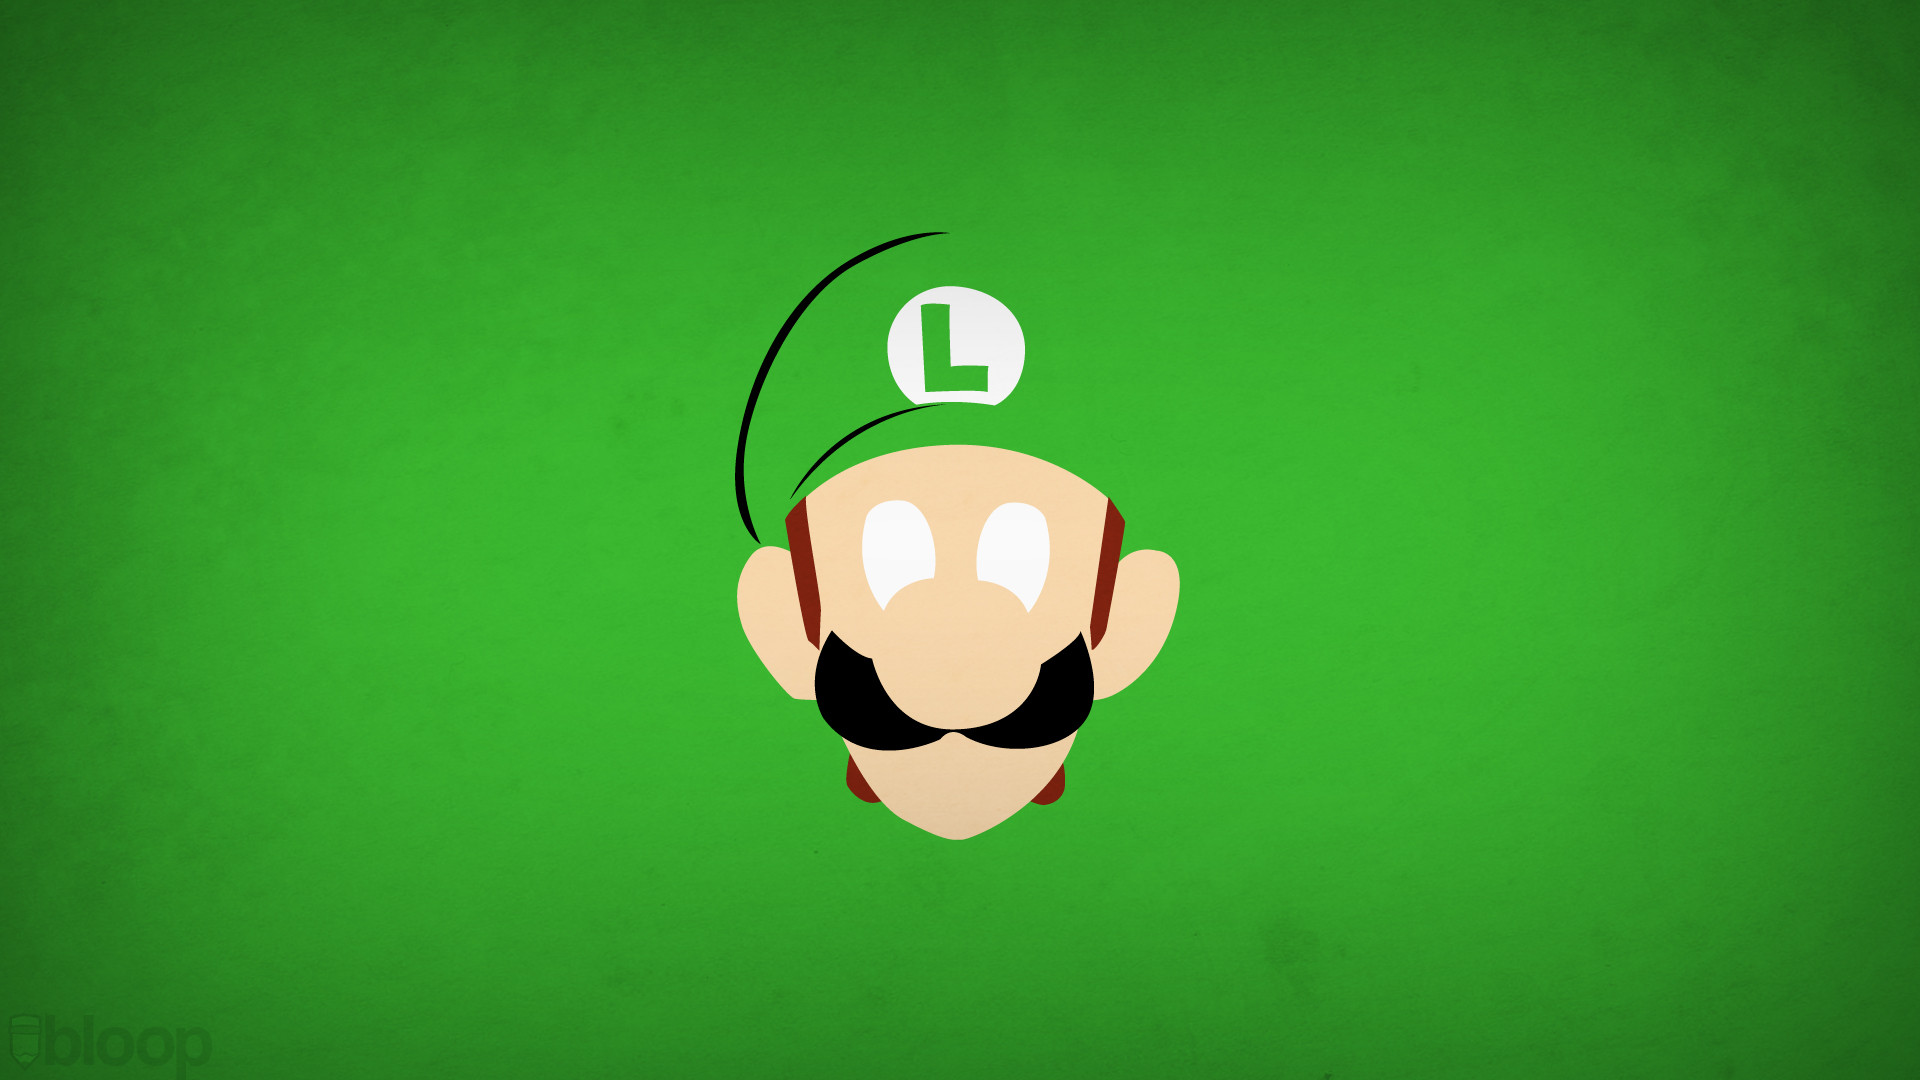 Video Game Wallpapers I'm a Luigi